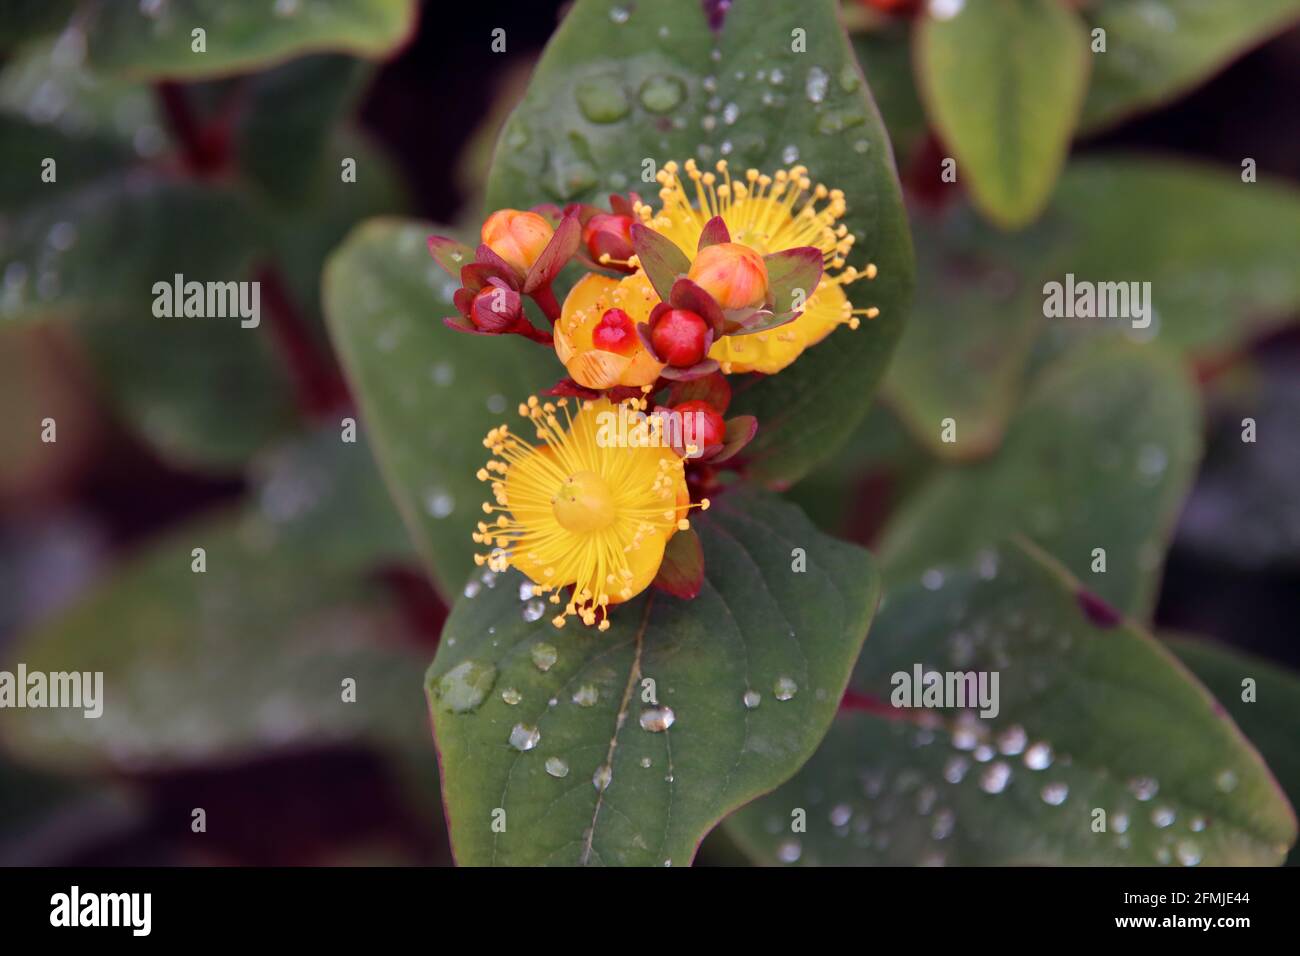 Red berries and yellow flowers of the Hypericum plant with rain drops in the Netherlands Stock Photo